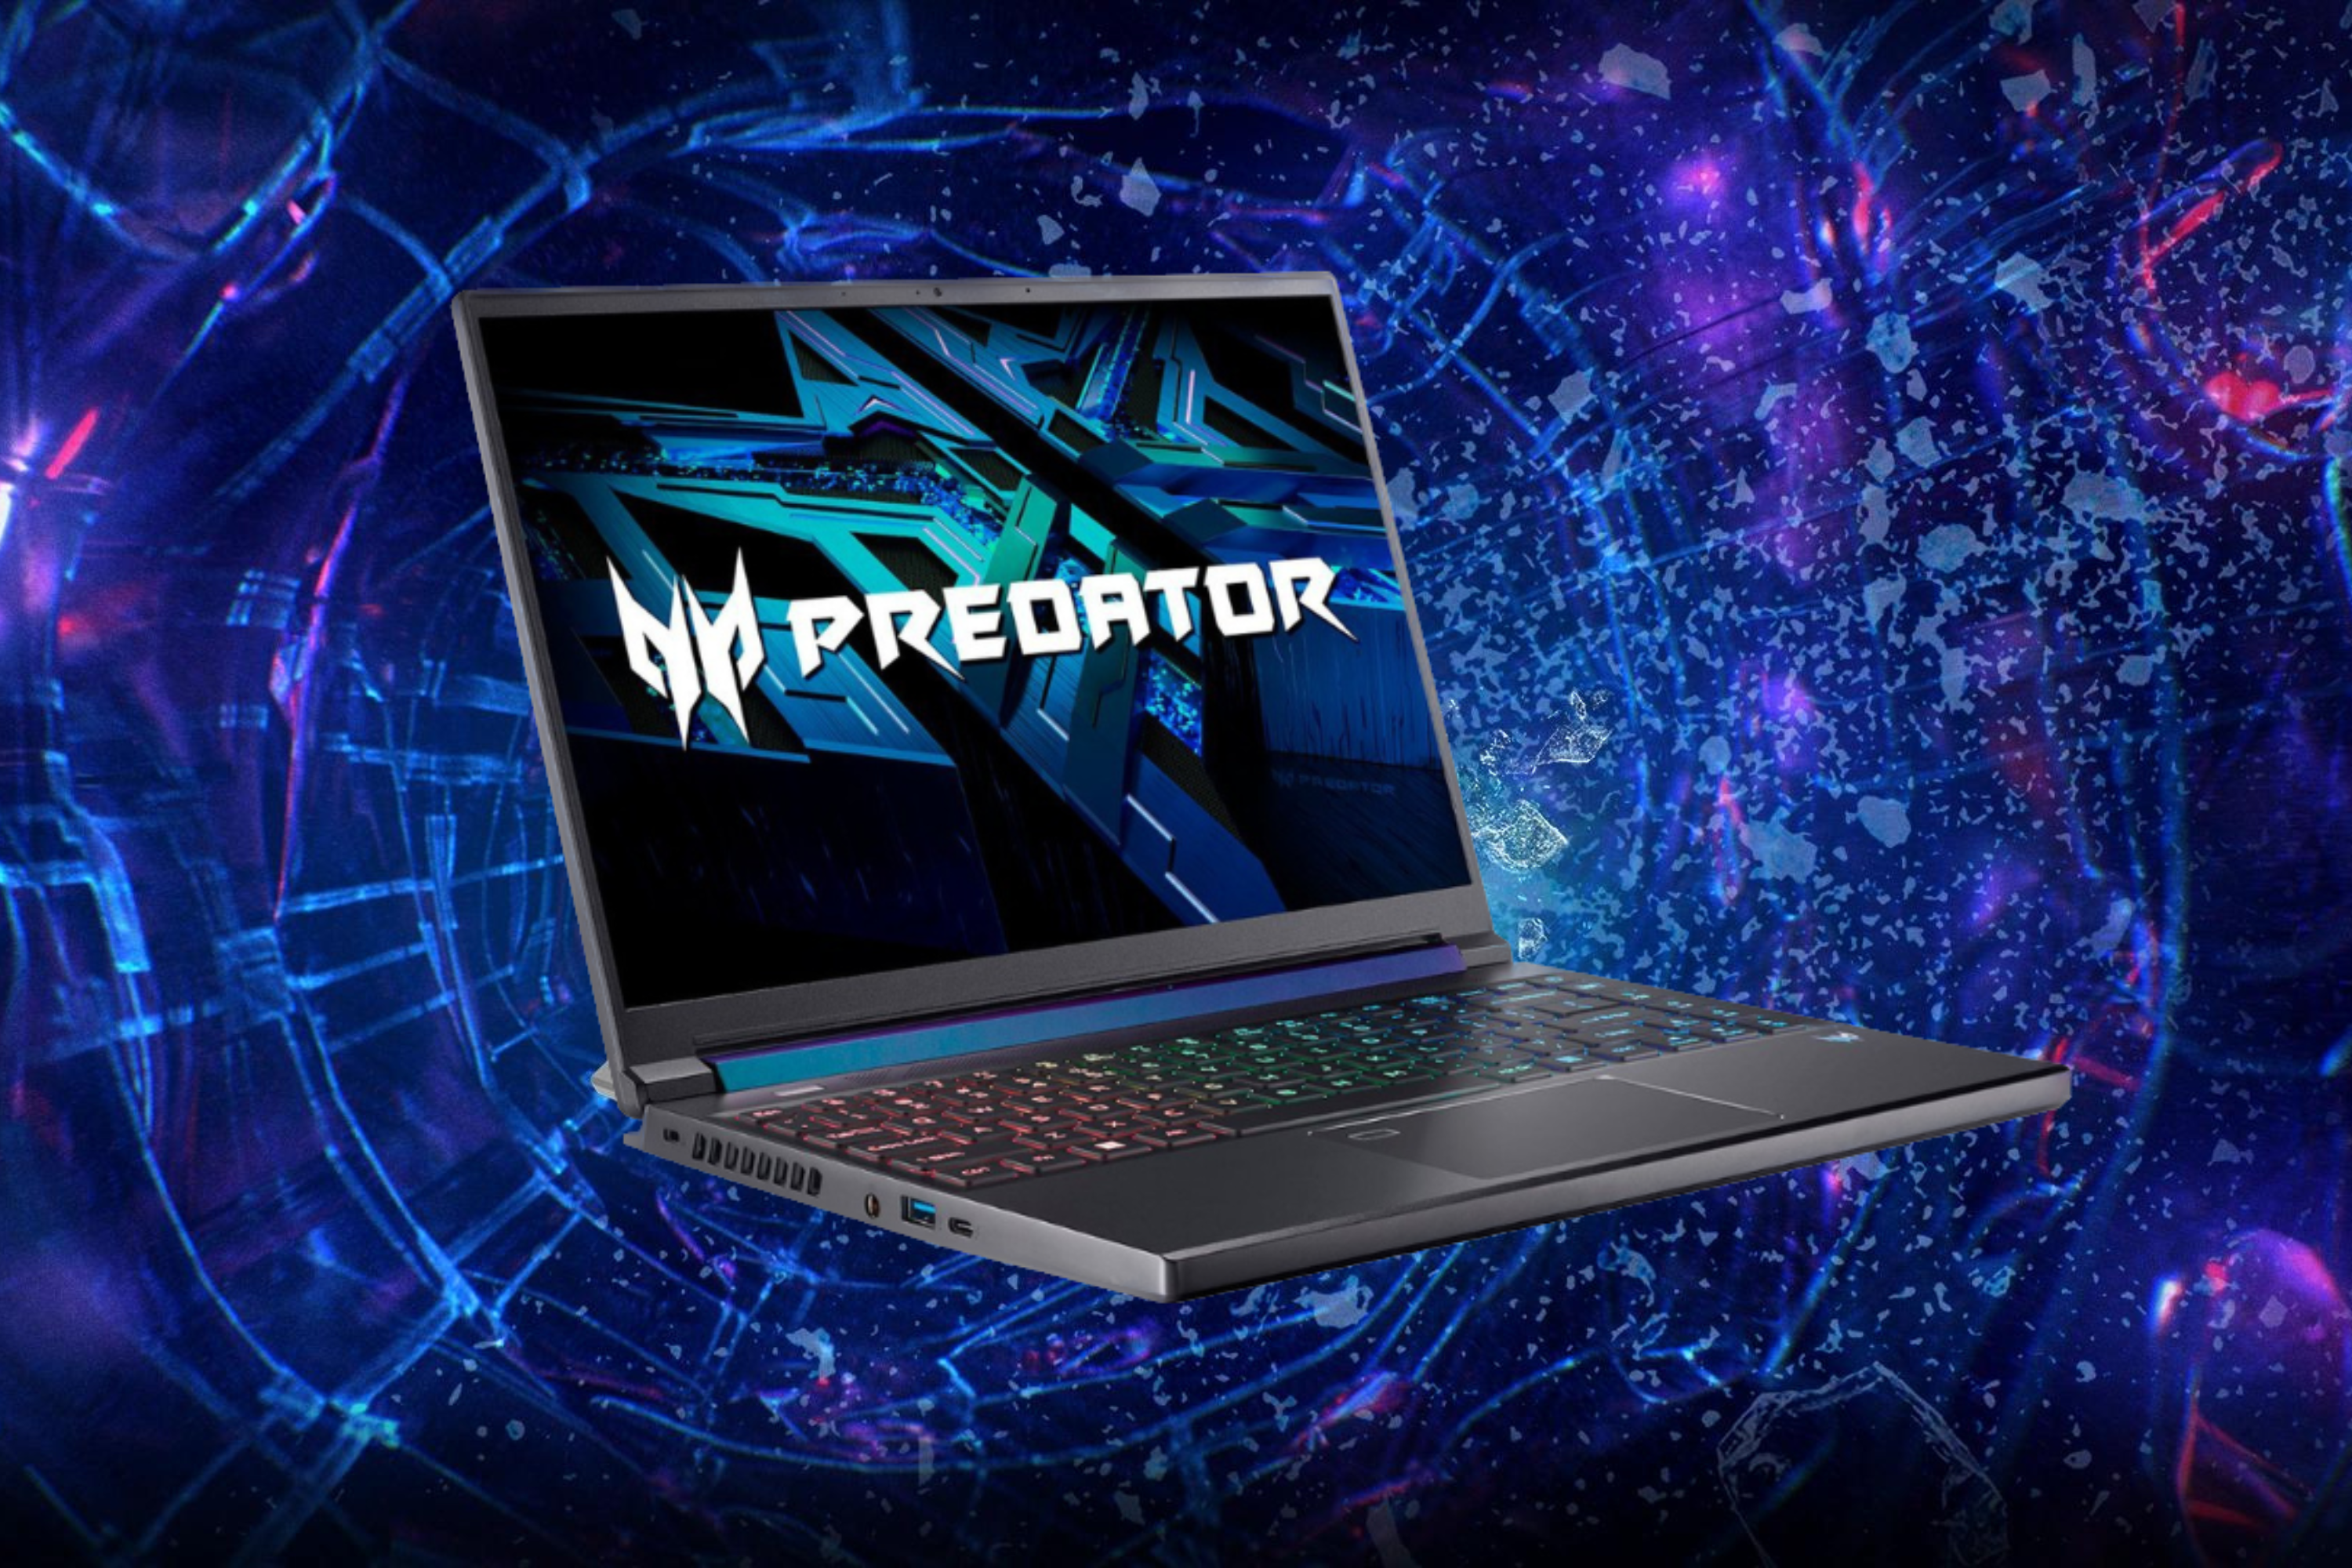 Acer Predator Triton 300 SE with heavy graphic background with lots of colors 